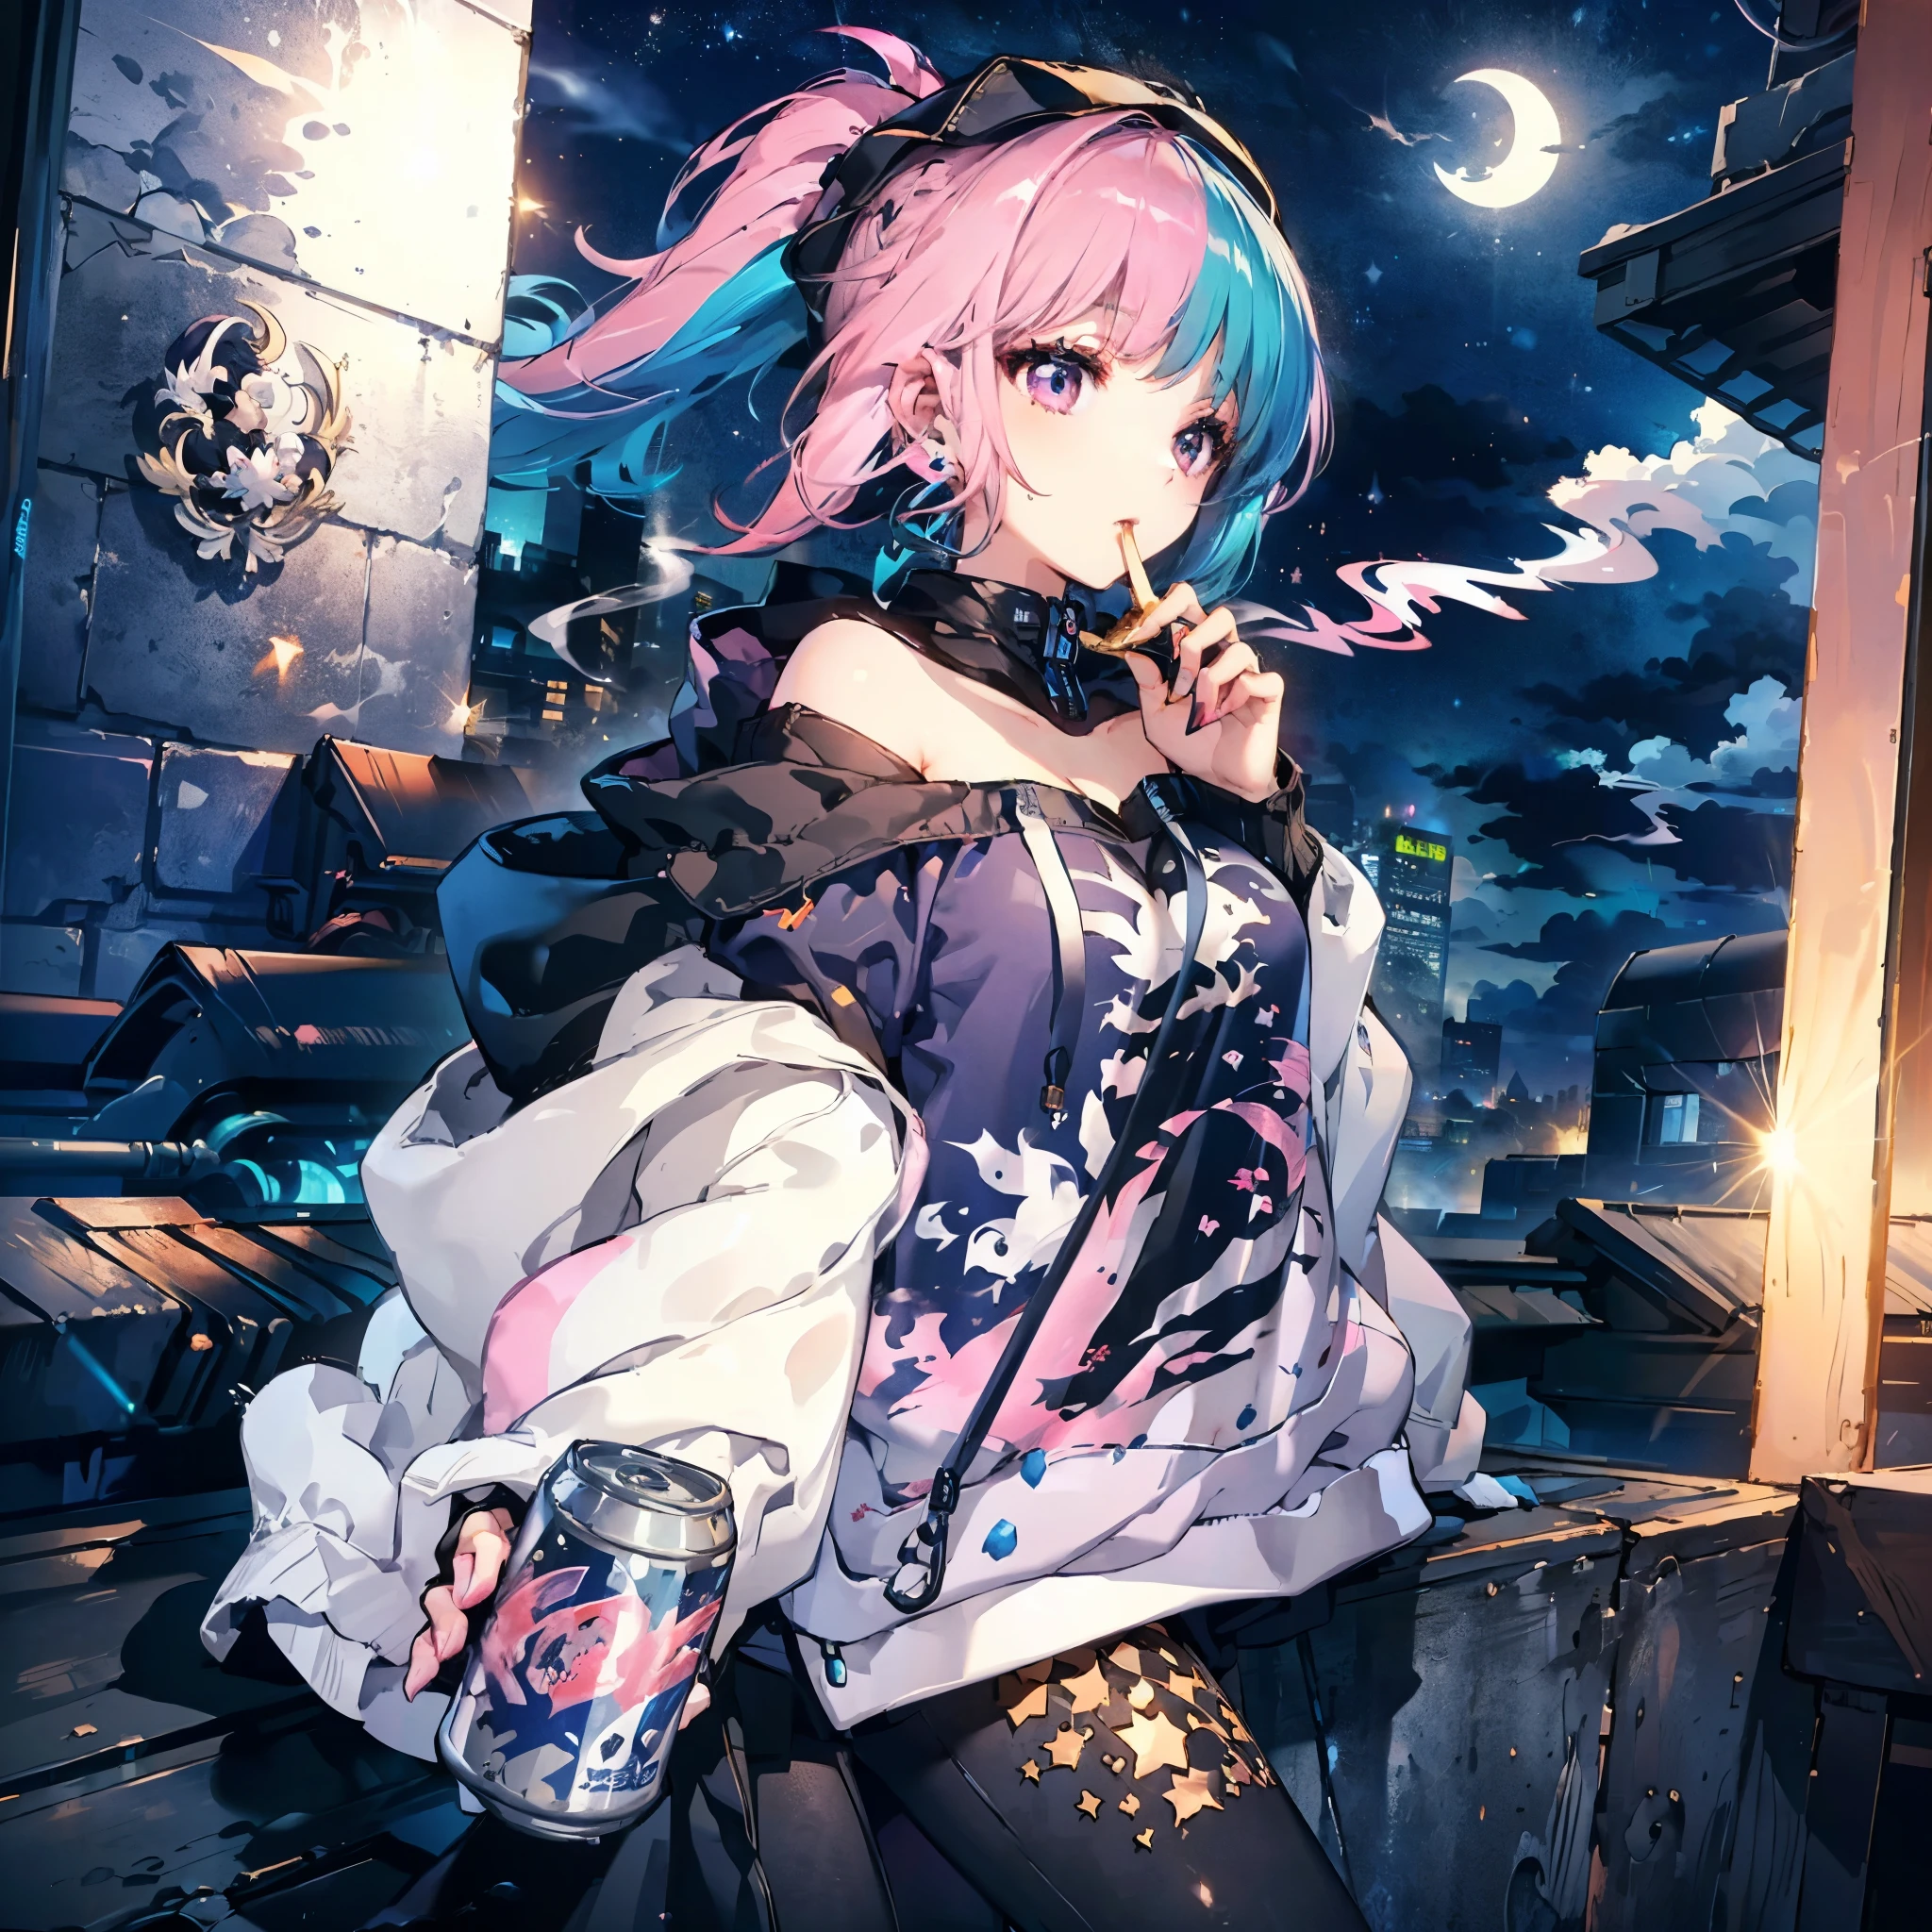 (((pink and blue hair　ponytail　Wear a cap　Off-the-shoulder hoodie)))　((cyber punk　Earrings　Smoking alone　Empty beer cans　Rooftop　Night City))　(Shining Moon　Shining Background)